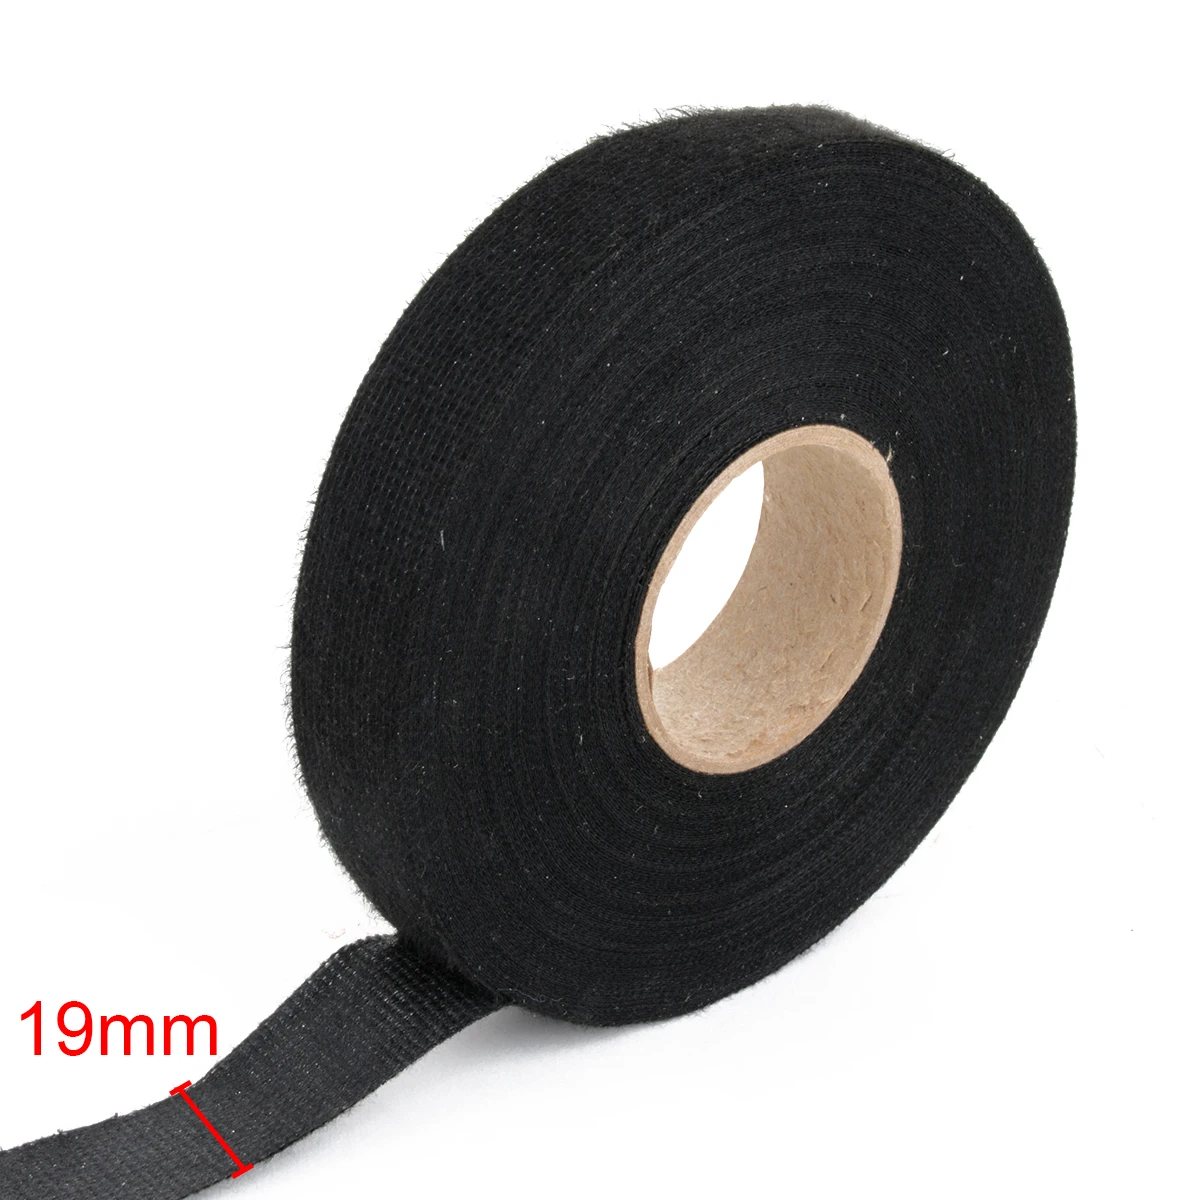 4pcs 19mm x 25m Adhesive Cloth Fabric Tape Cable Car Auto Looms Wiring Harness 